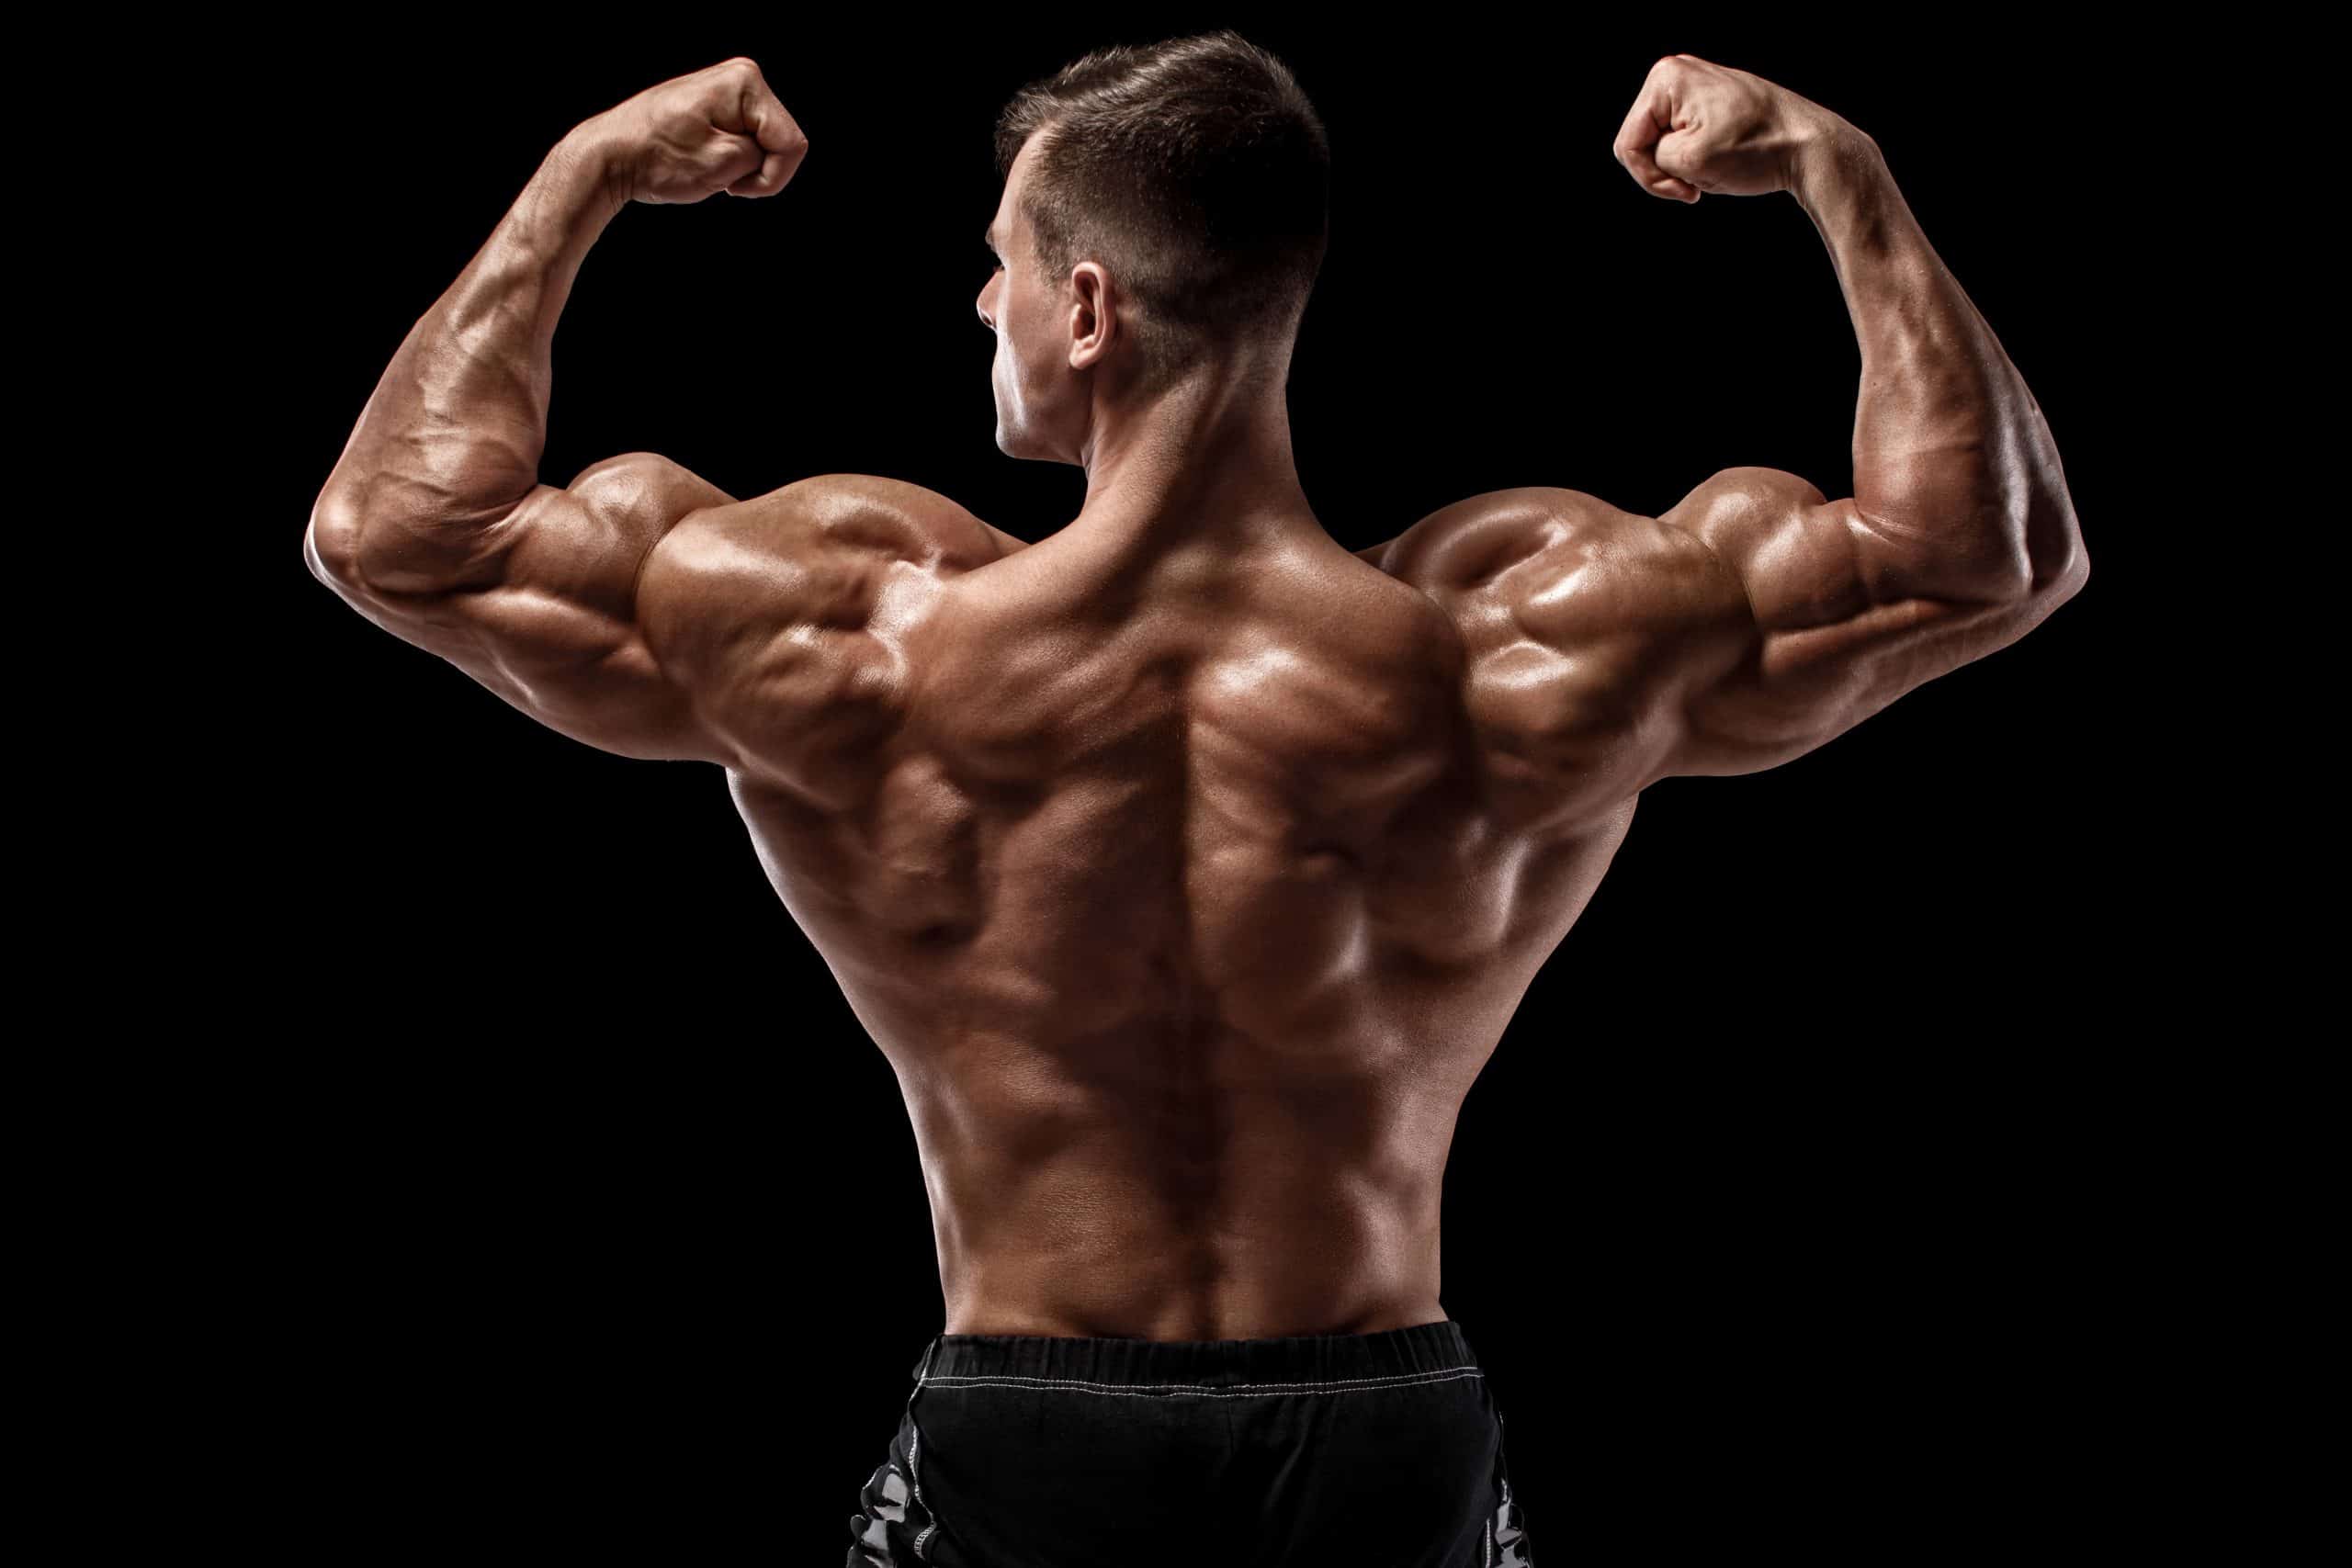 Bodybuilder with high testosterone levels, flexing his back